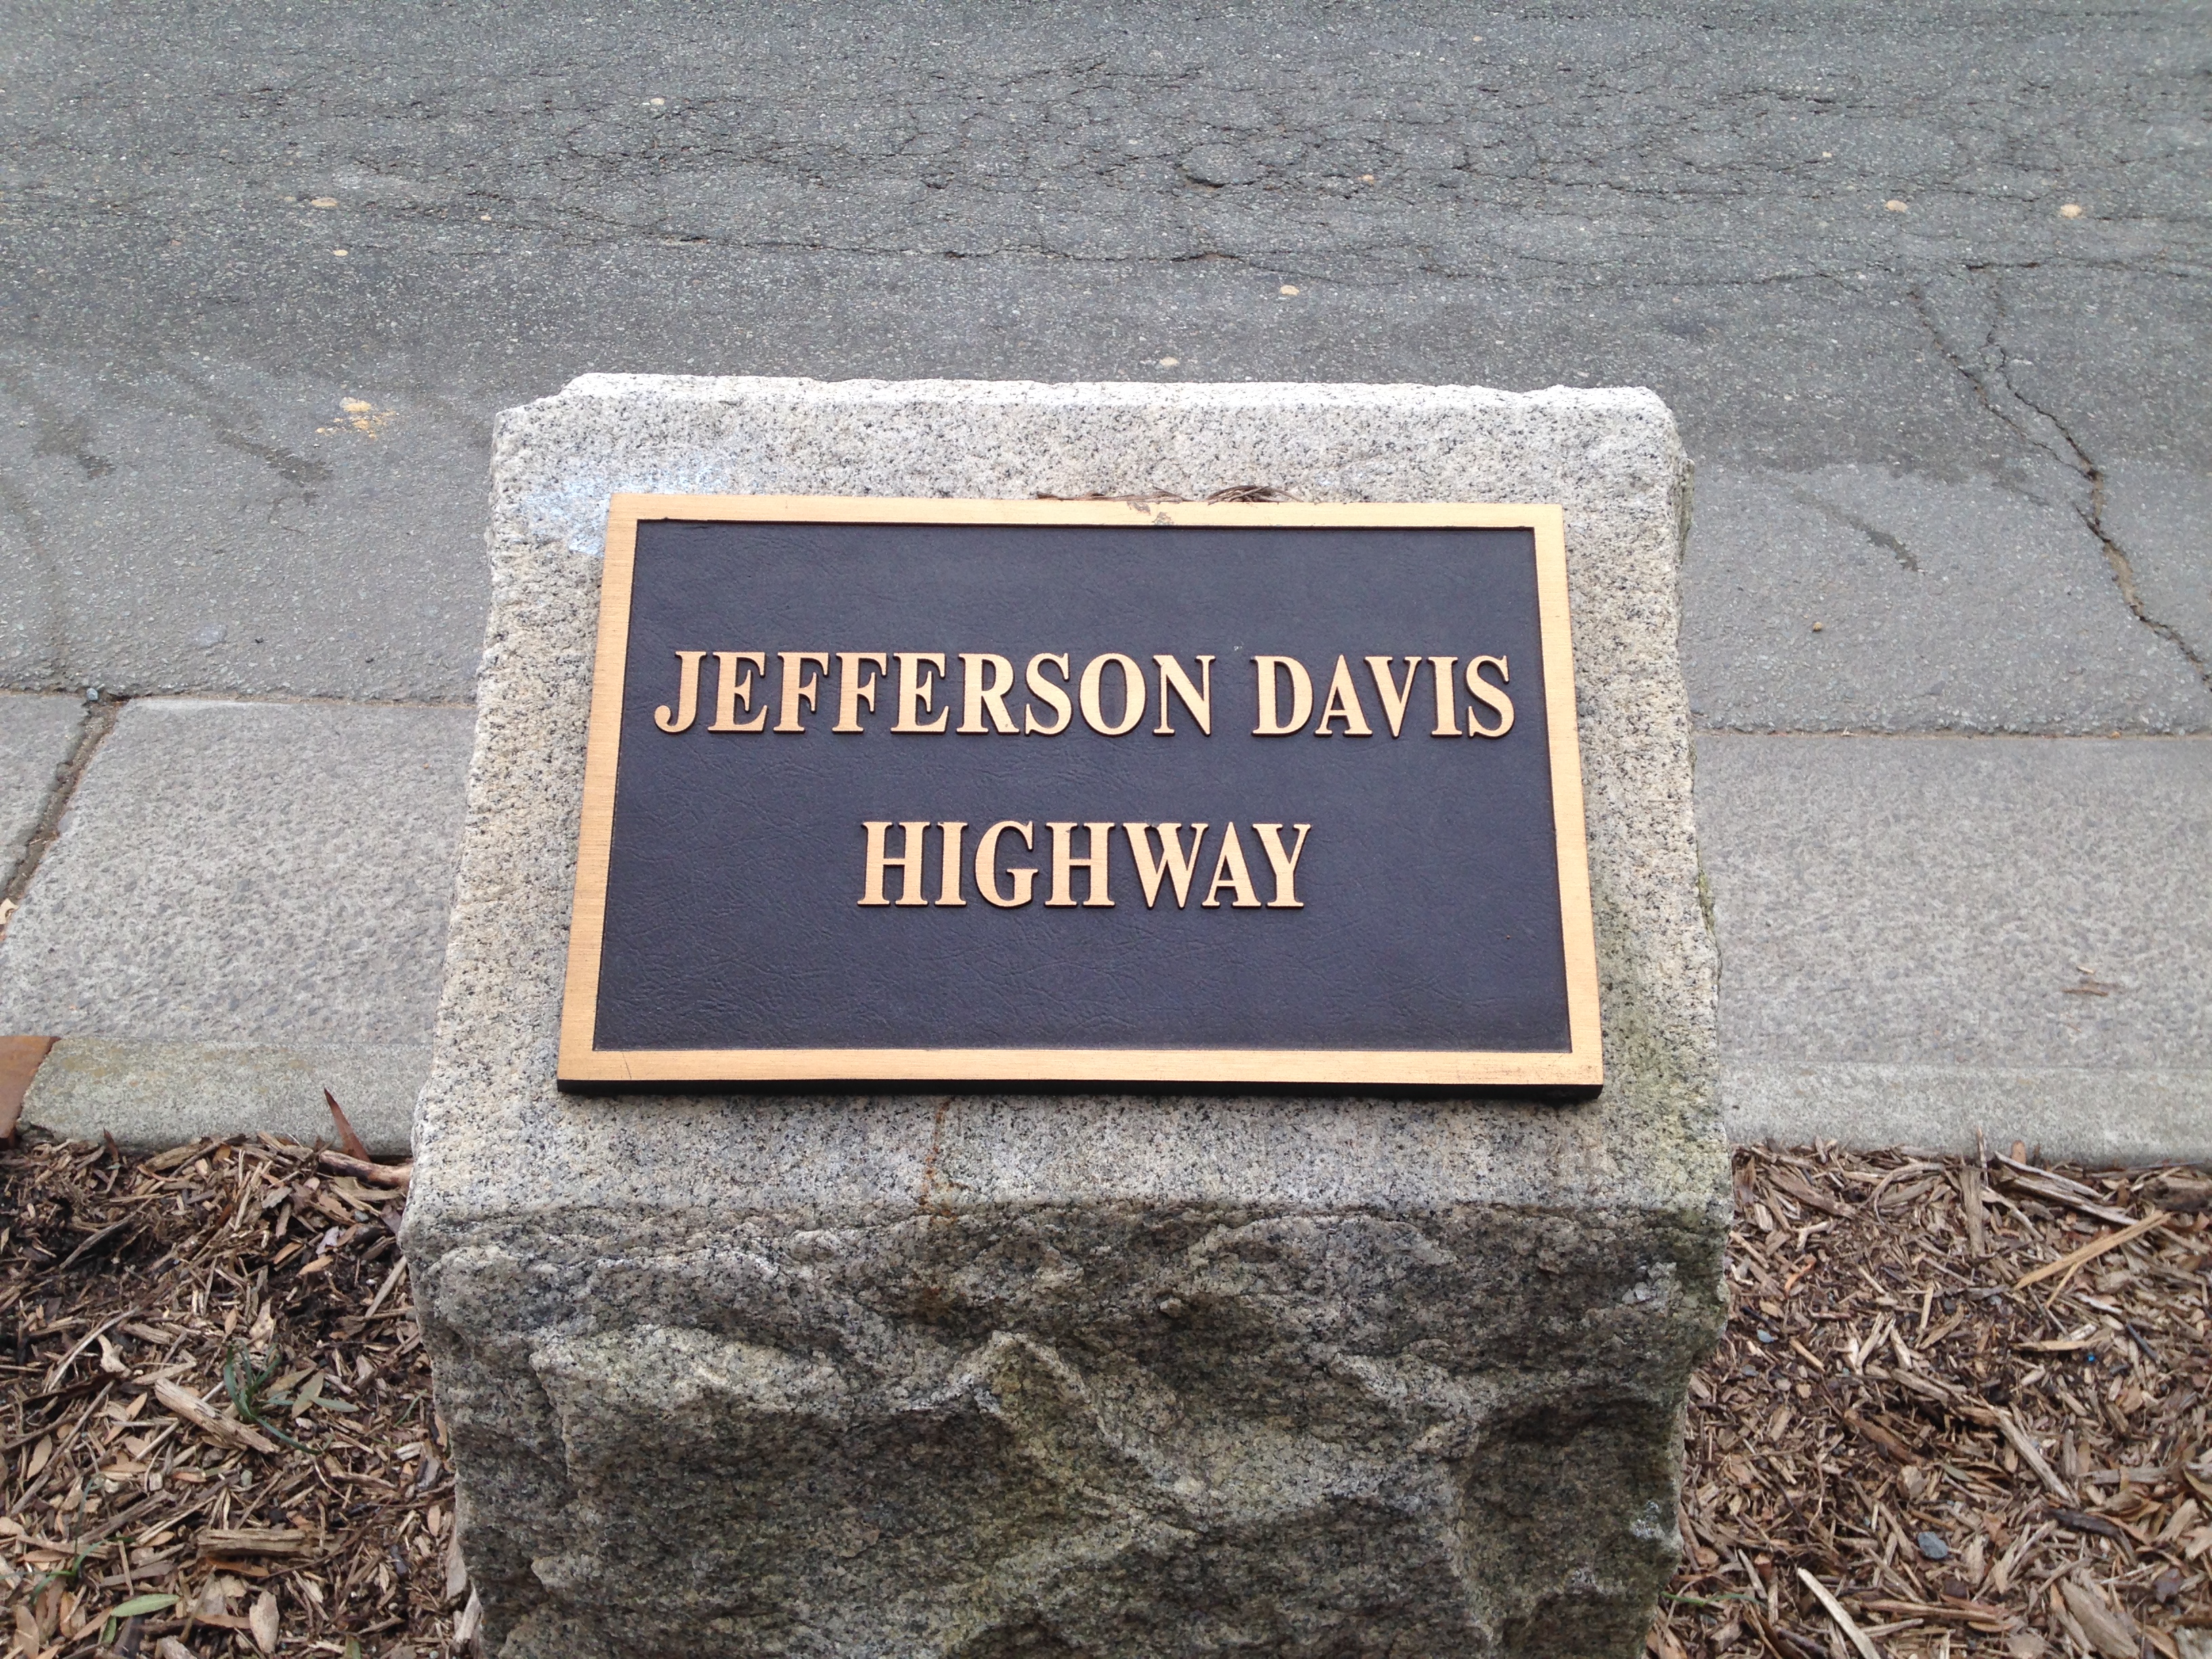 Chapel Hill Revisiting Options for Jefferson Davis Highway Marker